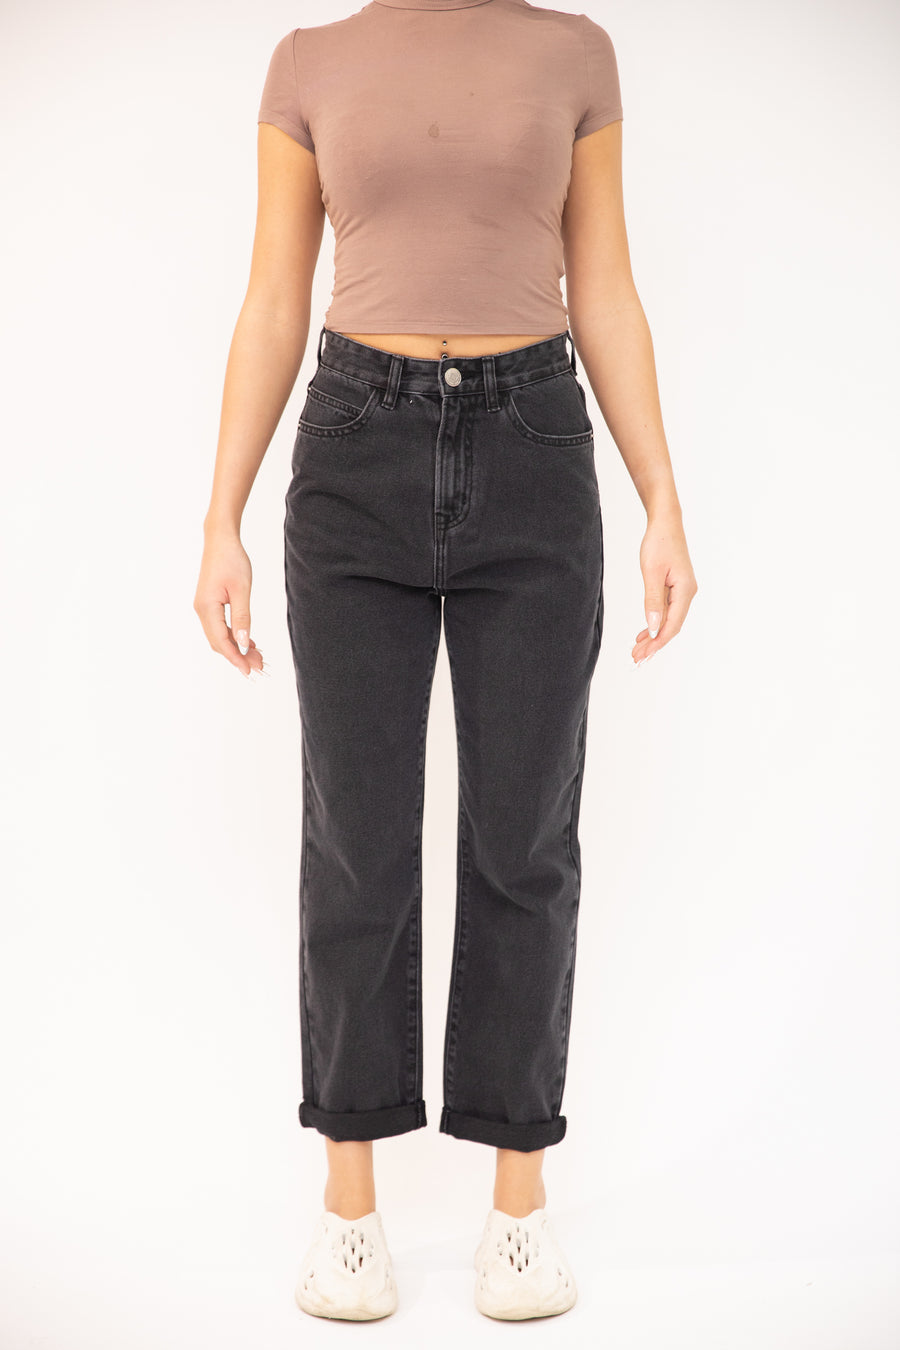 Just Organic Mia Jeans - Washed Black